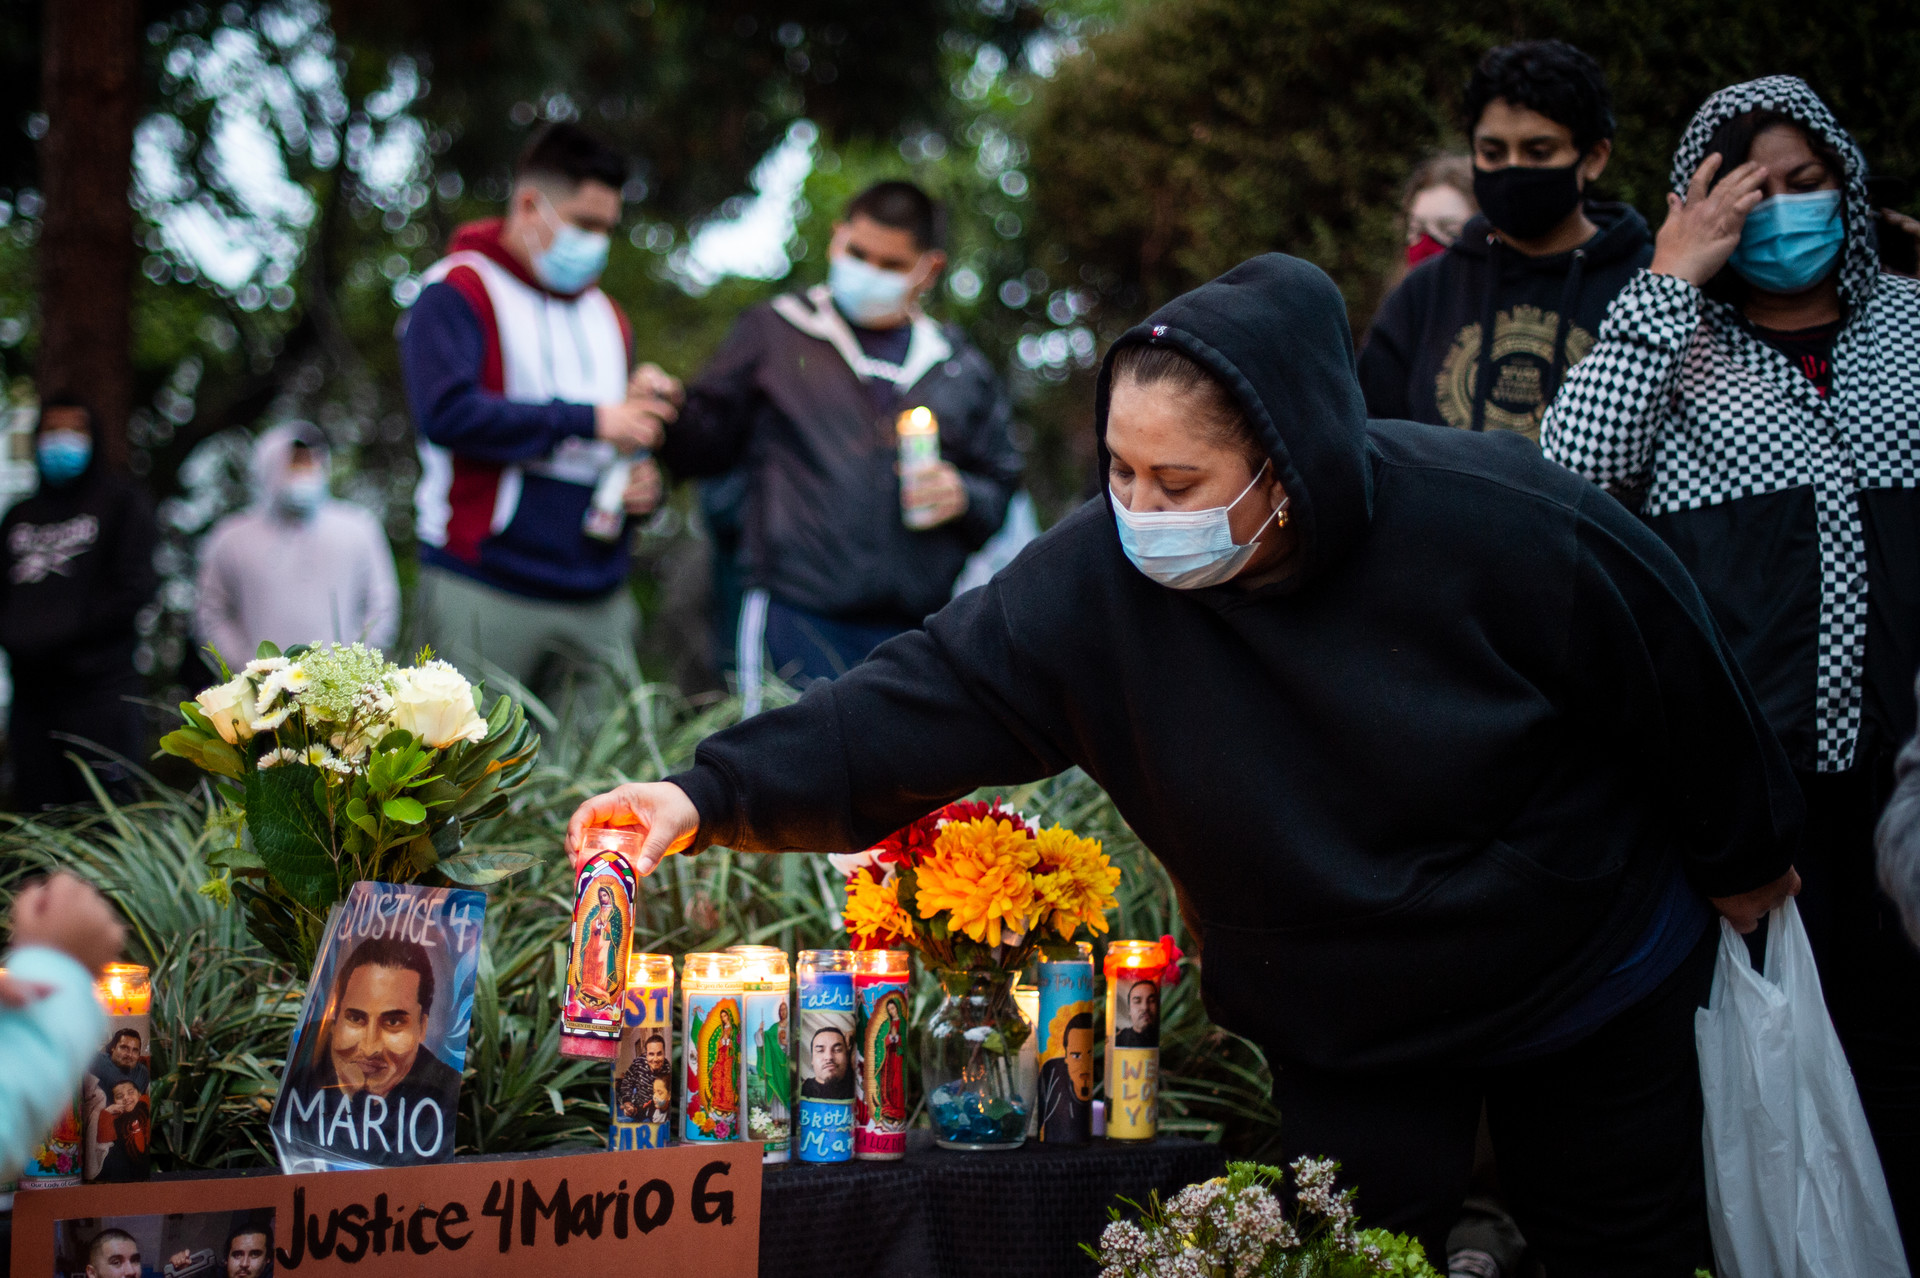 A woman wearing a black sweatshirt and a mask places a candle at an altar above the words "Justice 4 Mario G."